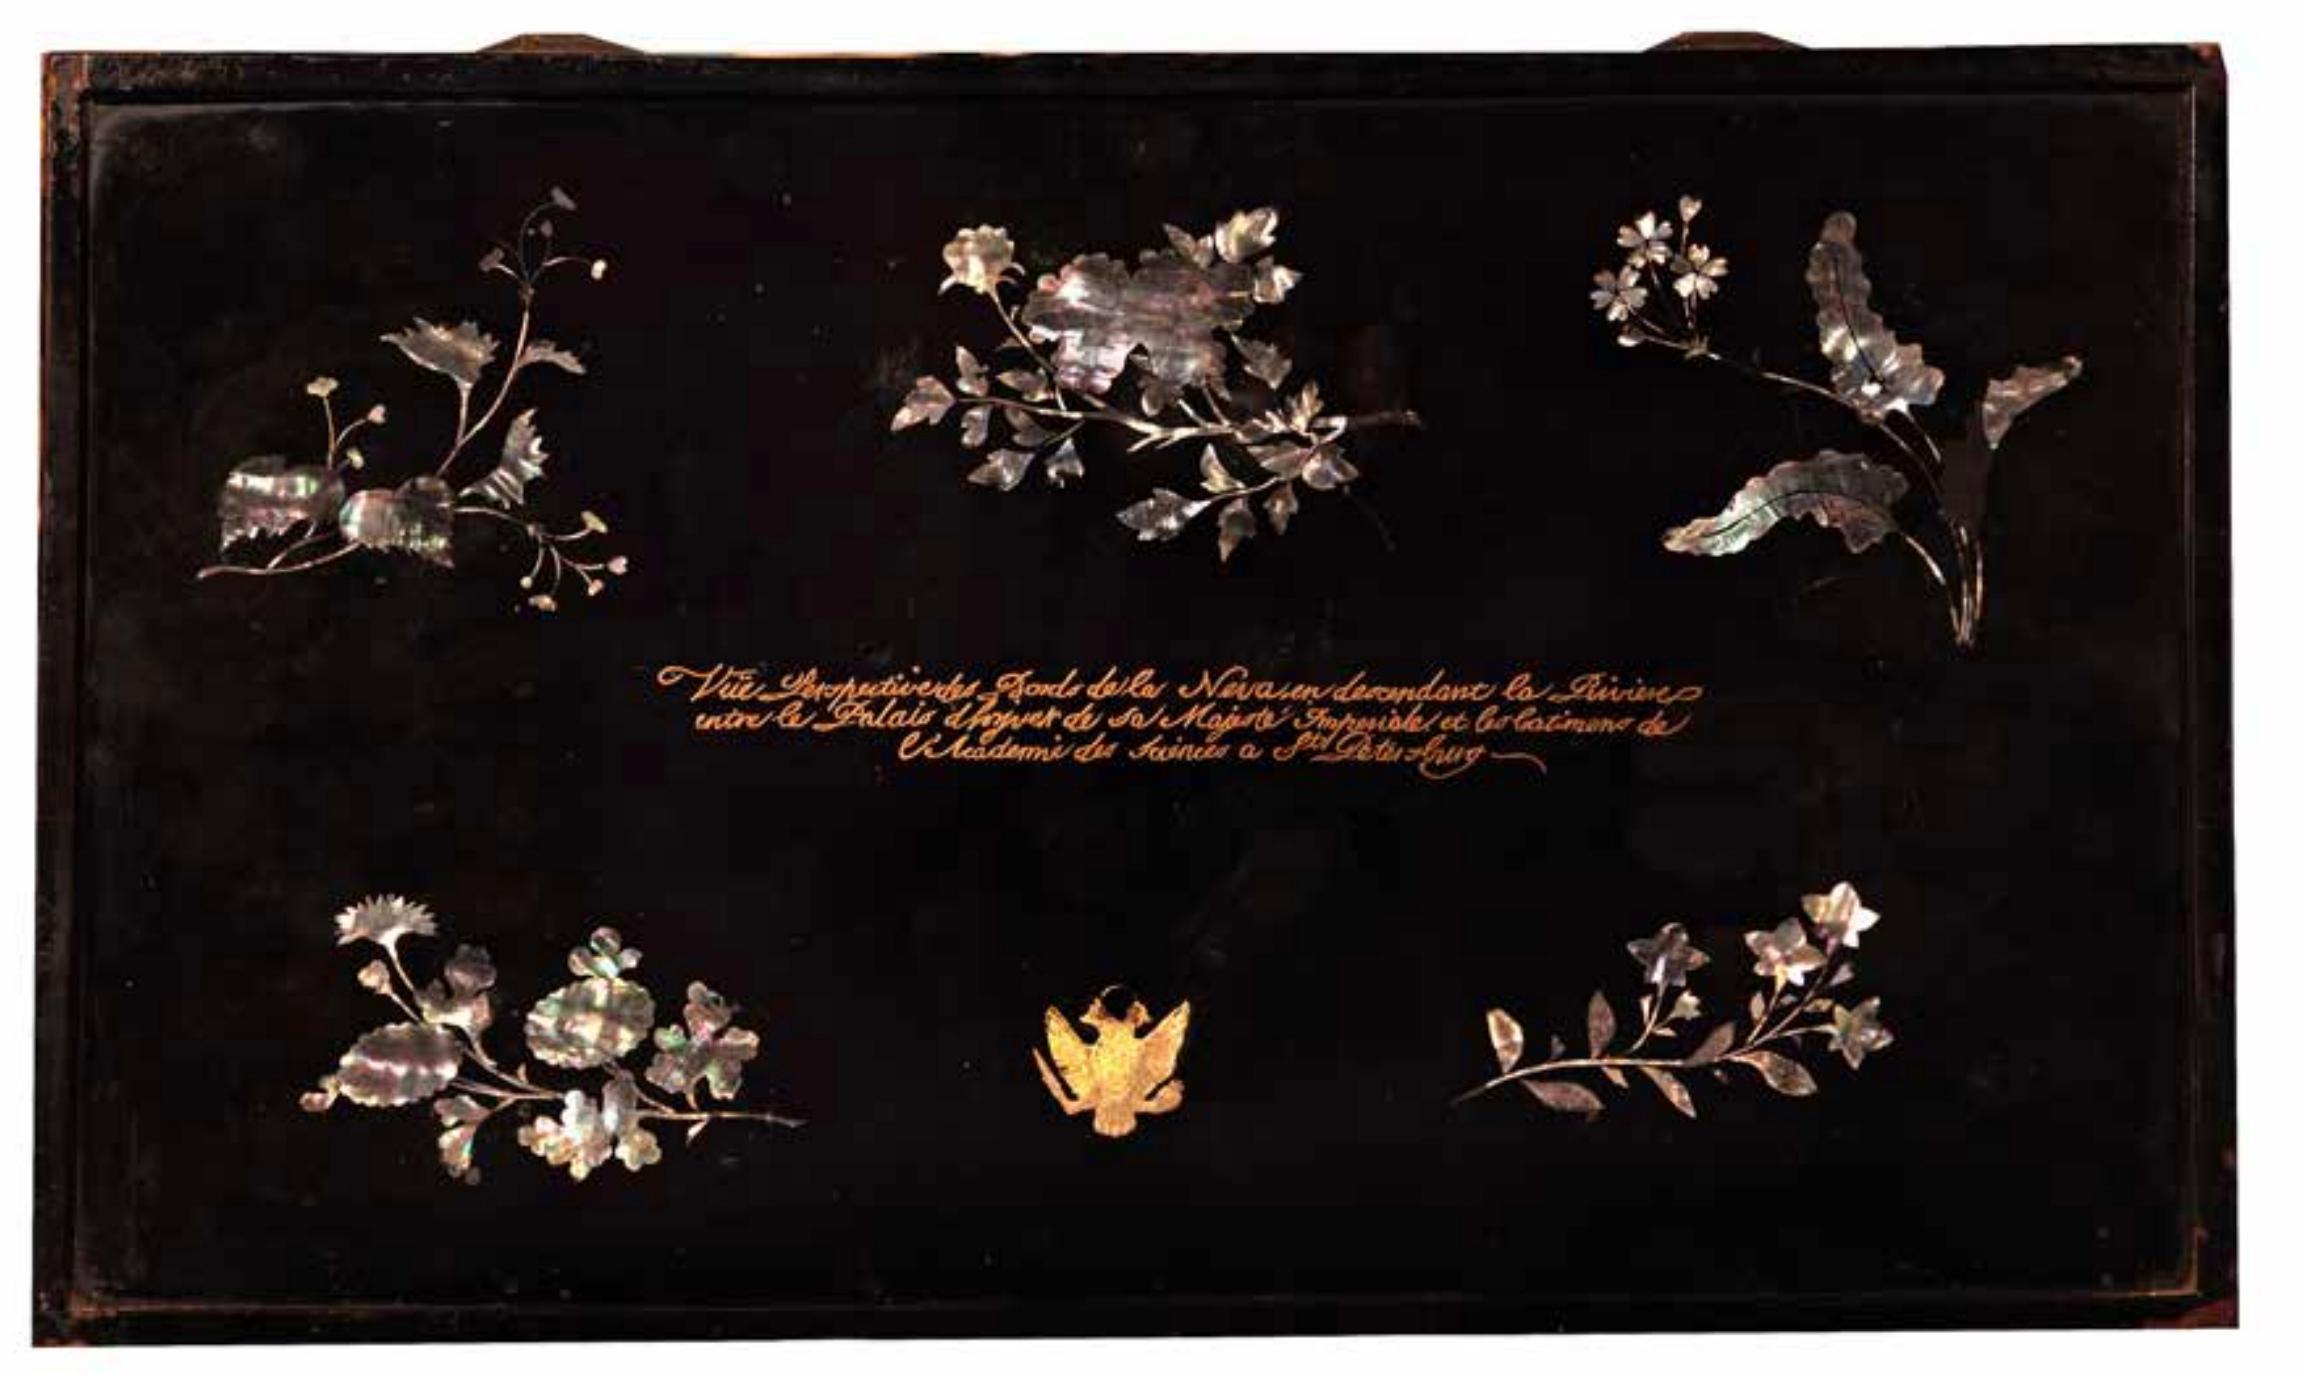 An important Japanese lacquer Maki-É Panel Depicting St. Petersburg on the River Neva, with the winter palace on the left and the academy of science on the right, 18th century.

Nagasaki, 1780-1800

In black lacquer on copper, the front